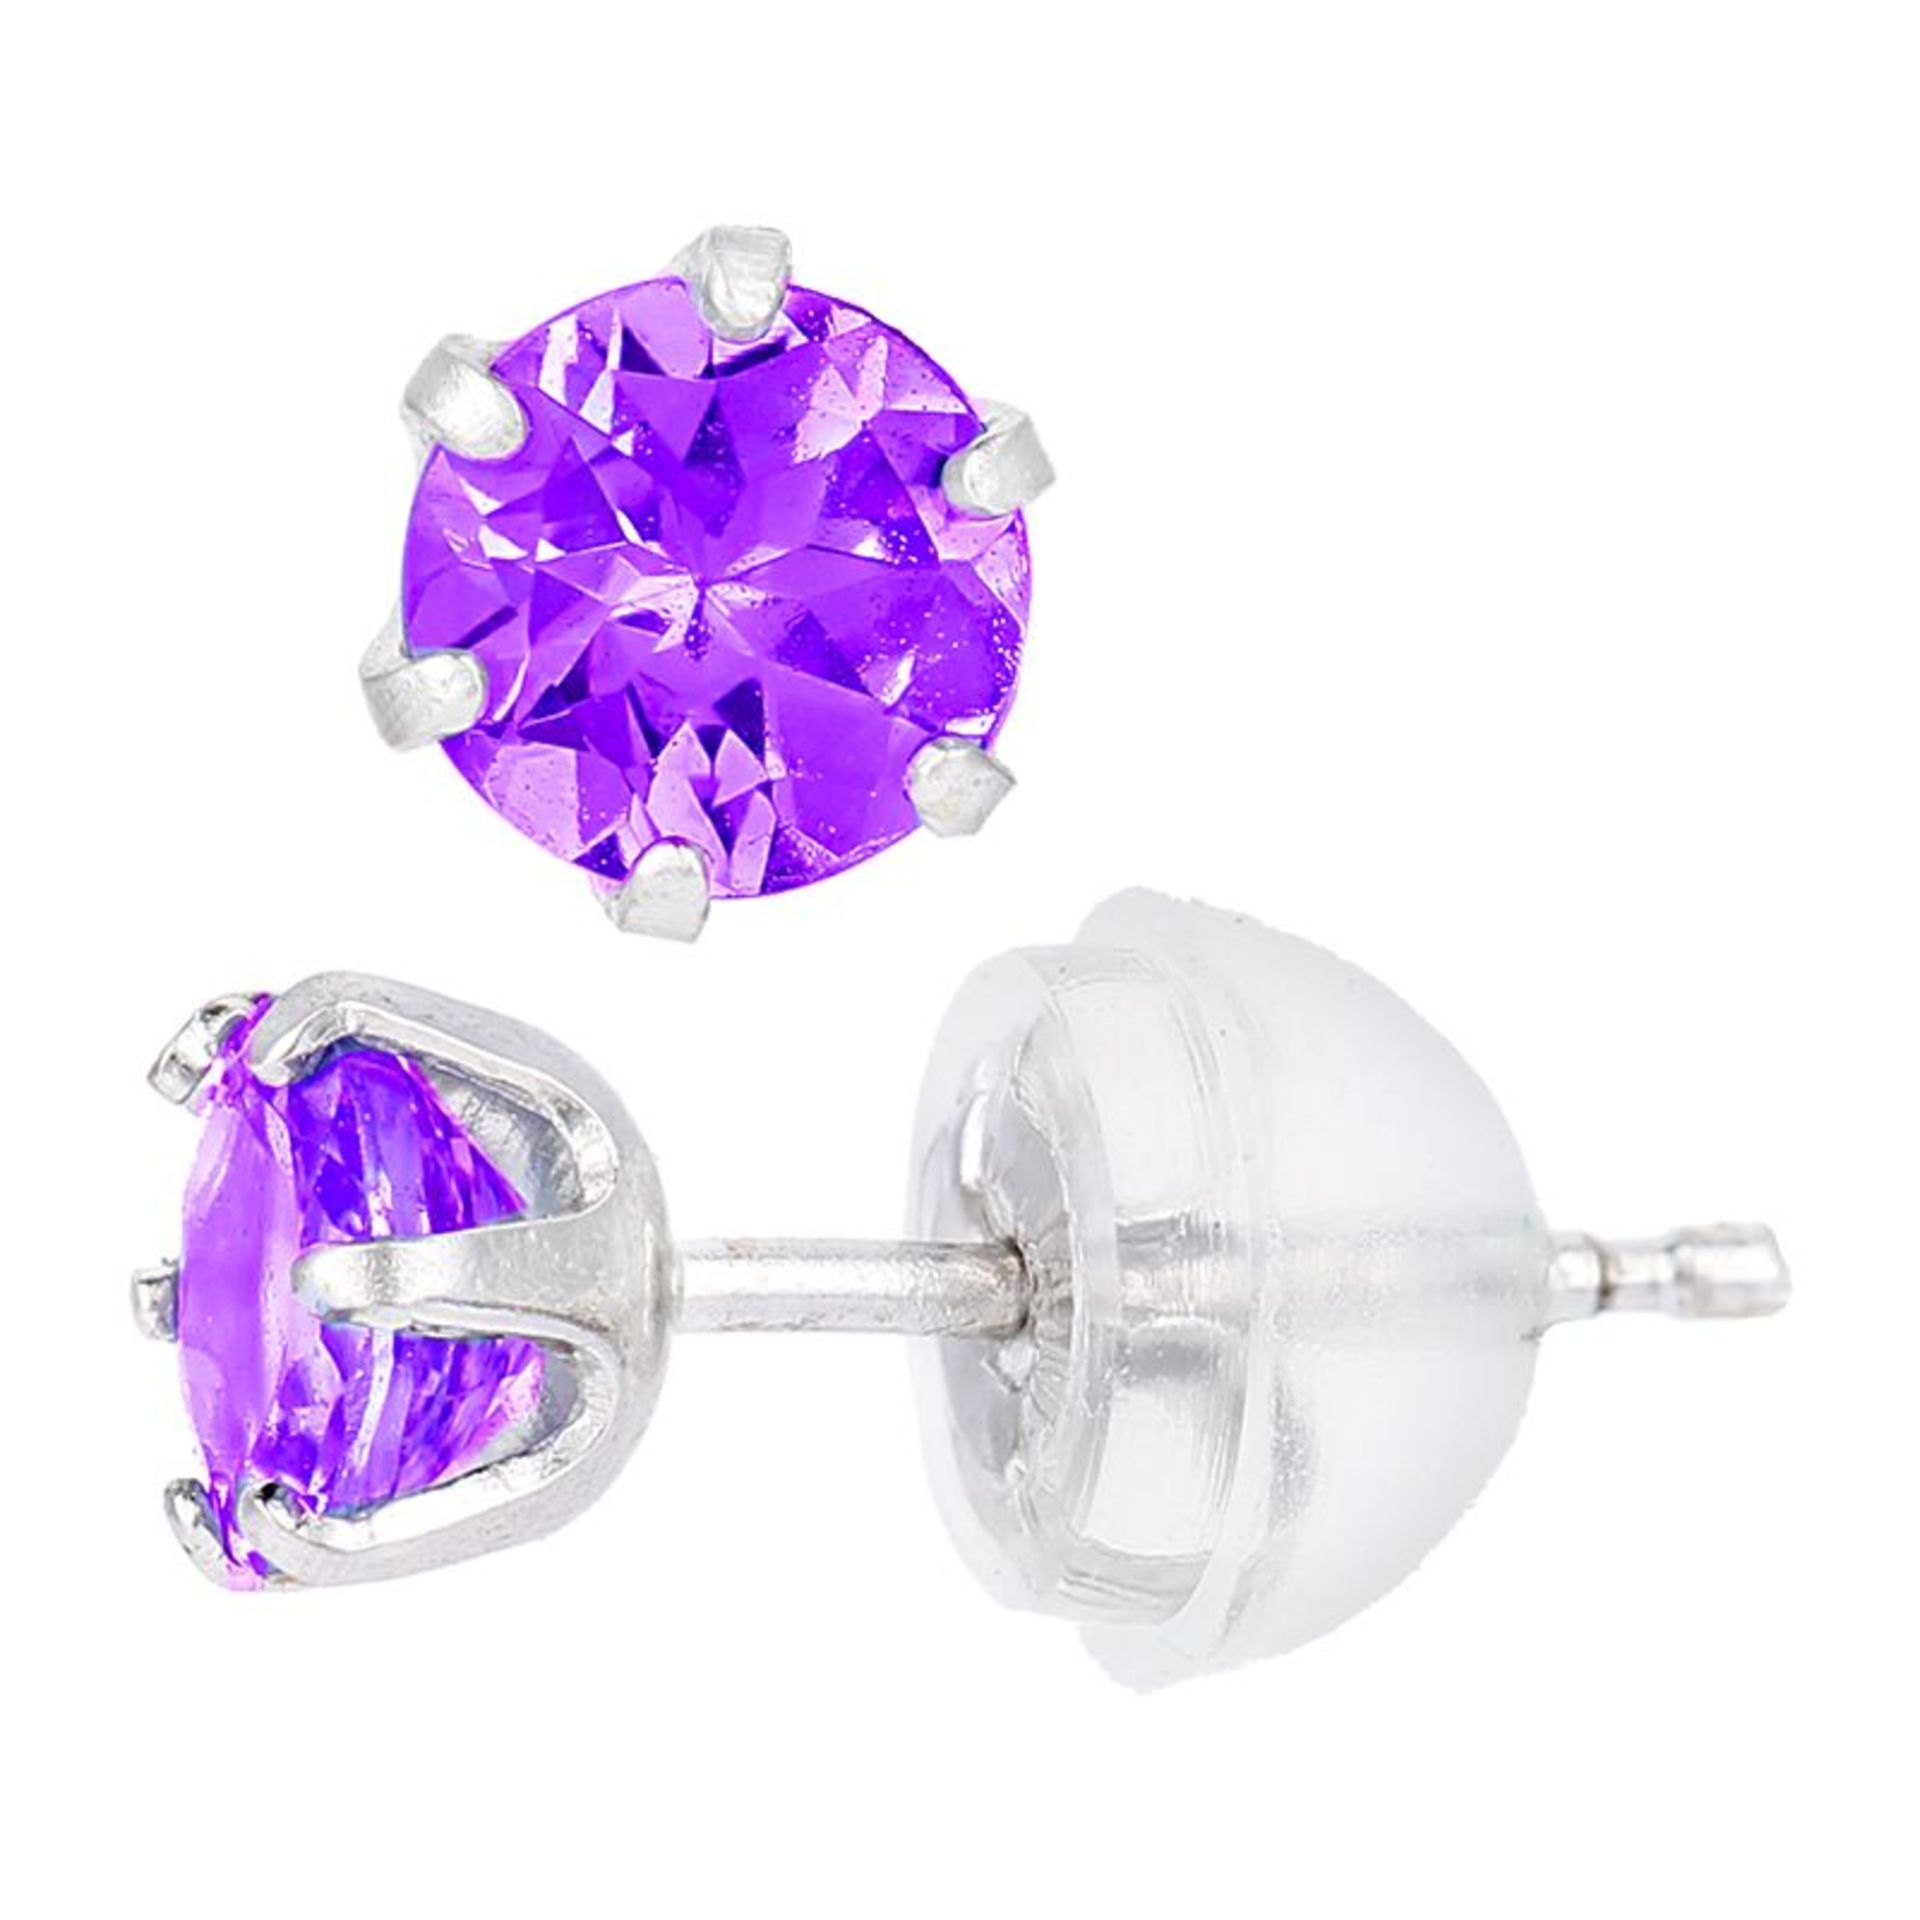 Amethyst Earrings In Platinum, Metal Platinum 900, Weight 0.59, RRP £234.99 (1a863idsu am)(Comes